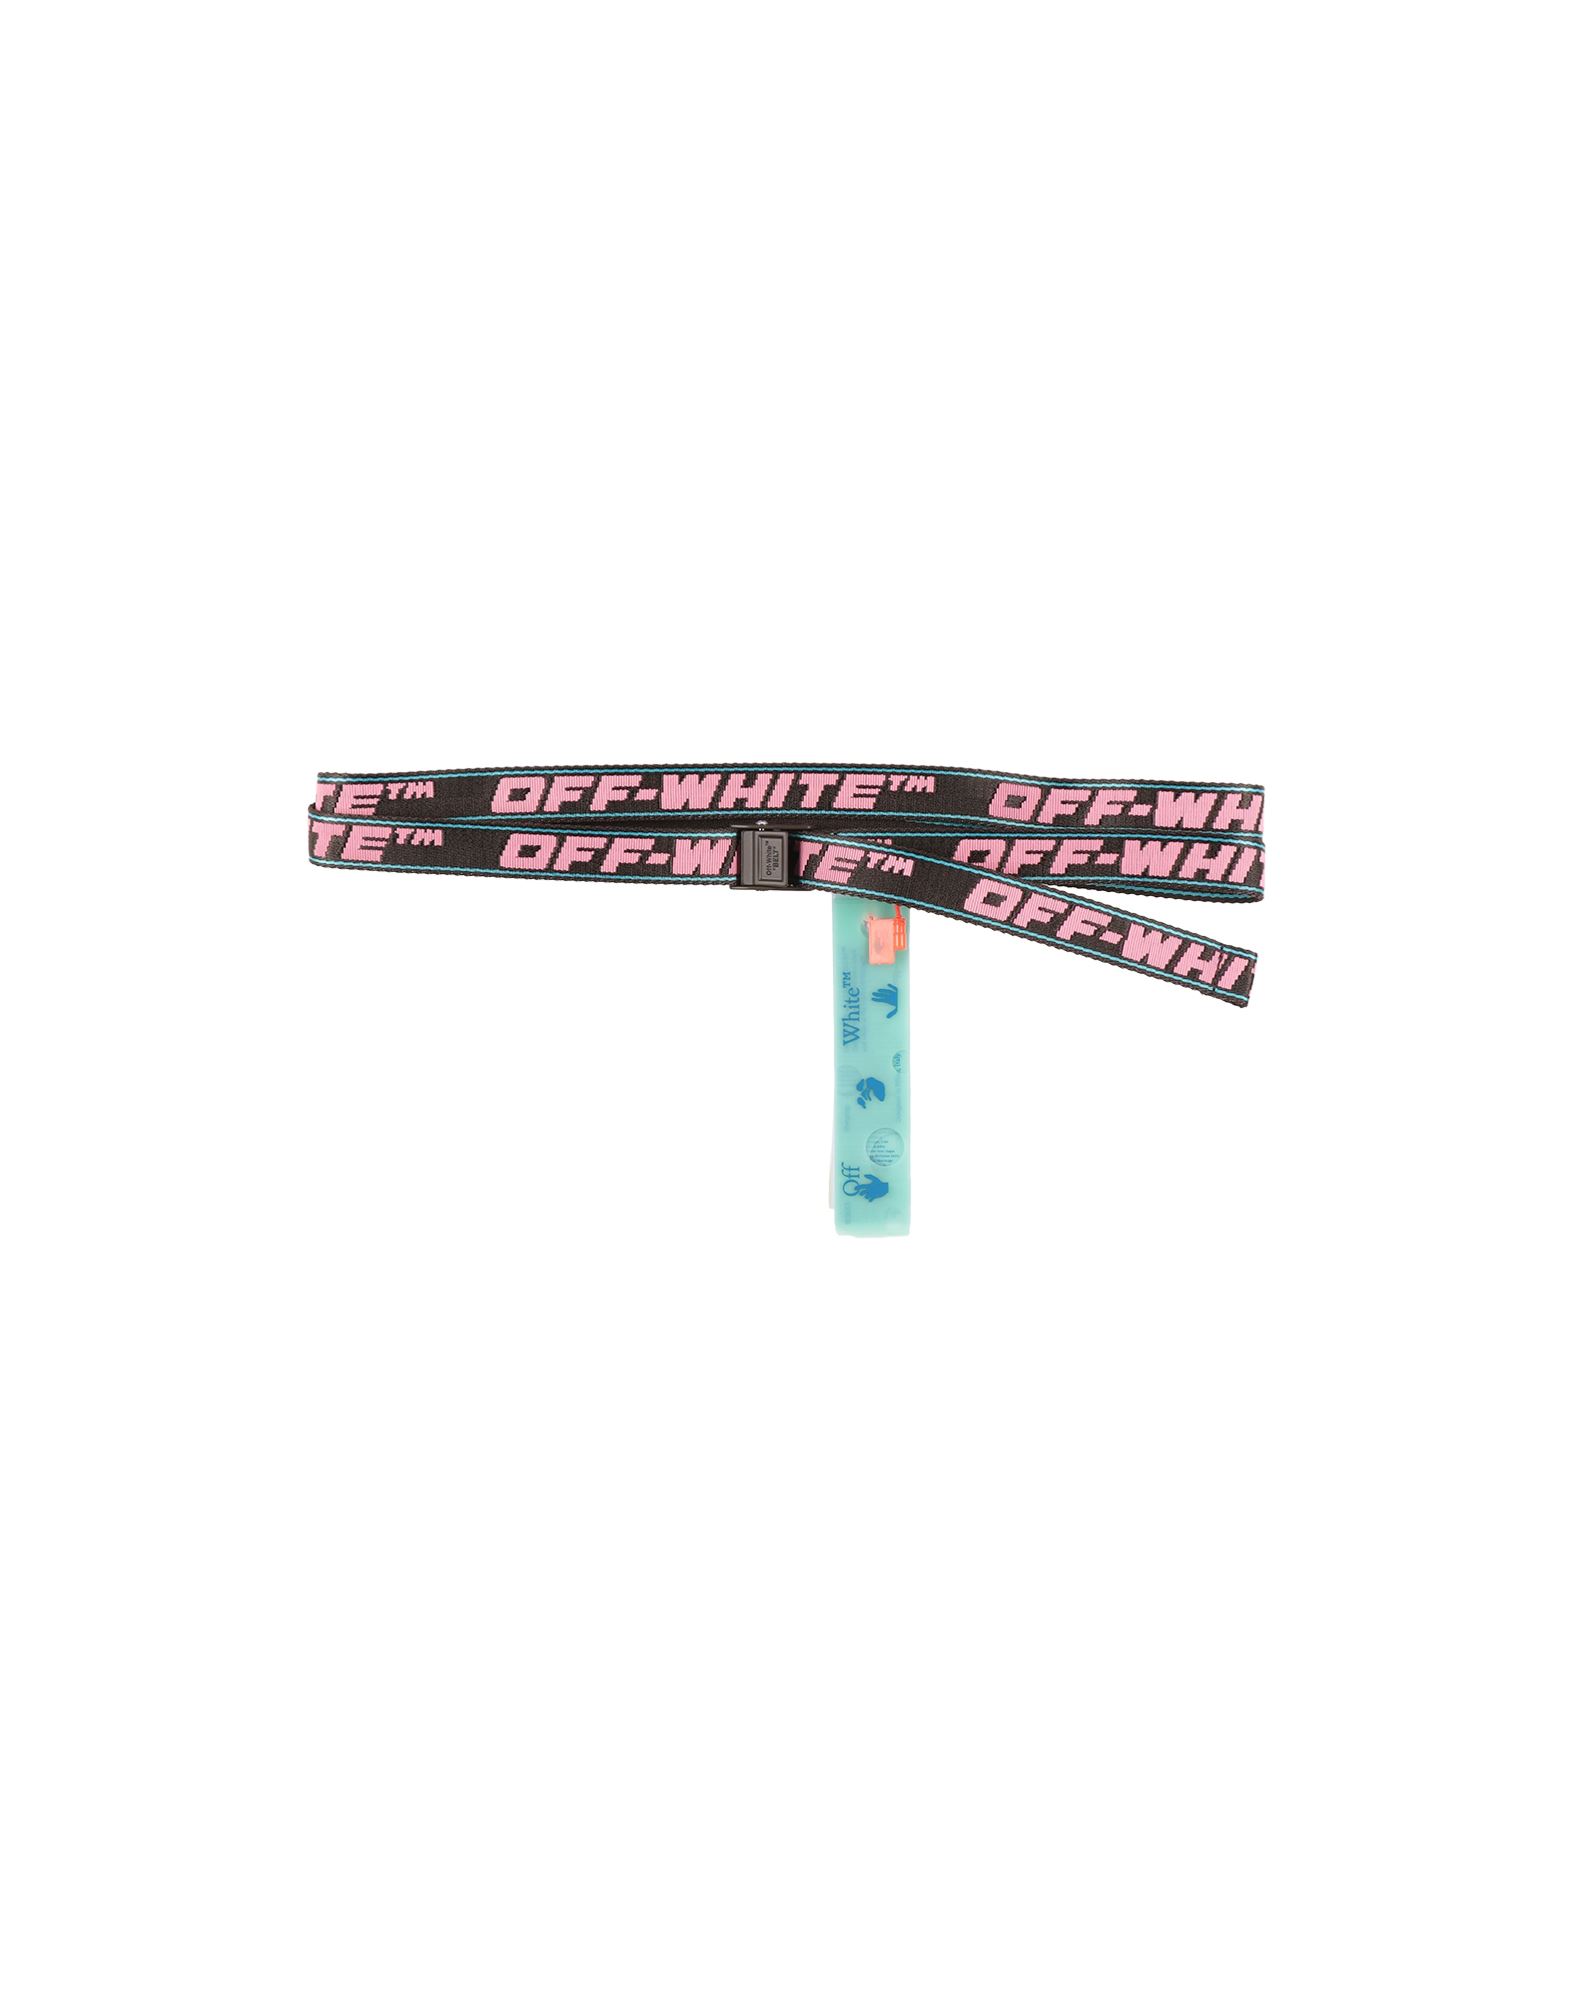 OFF-WHITE &TRADE; BELTS